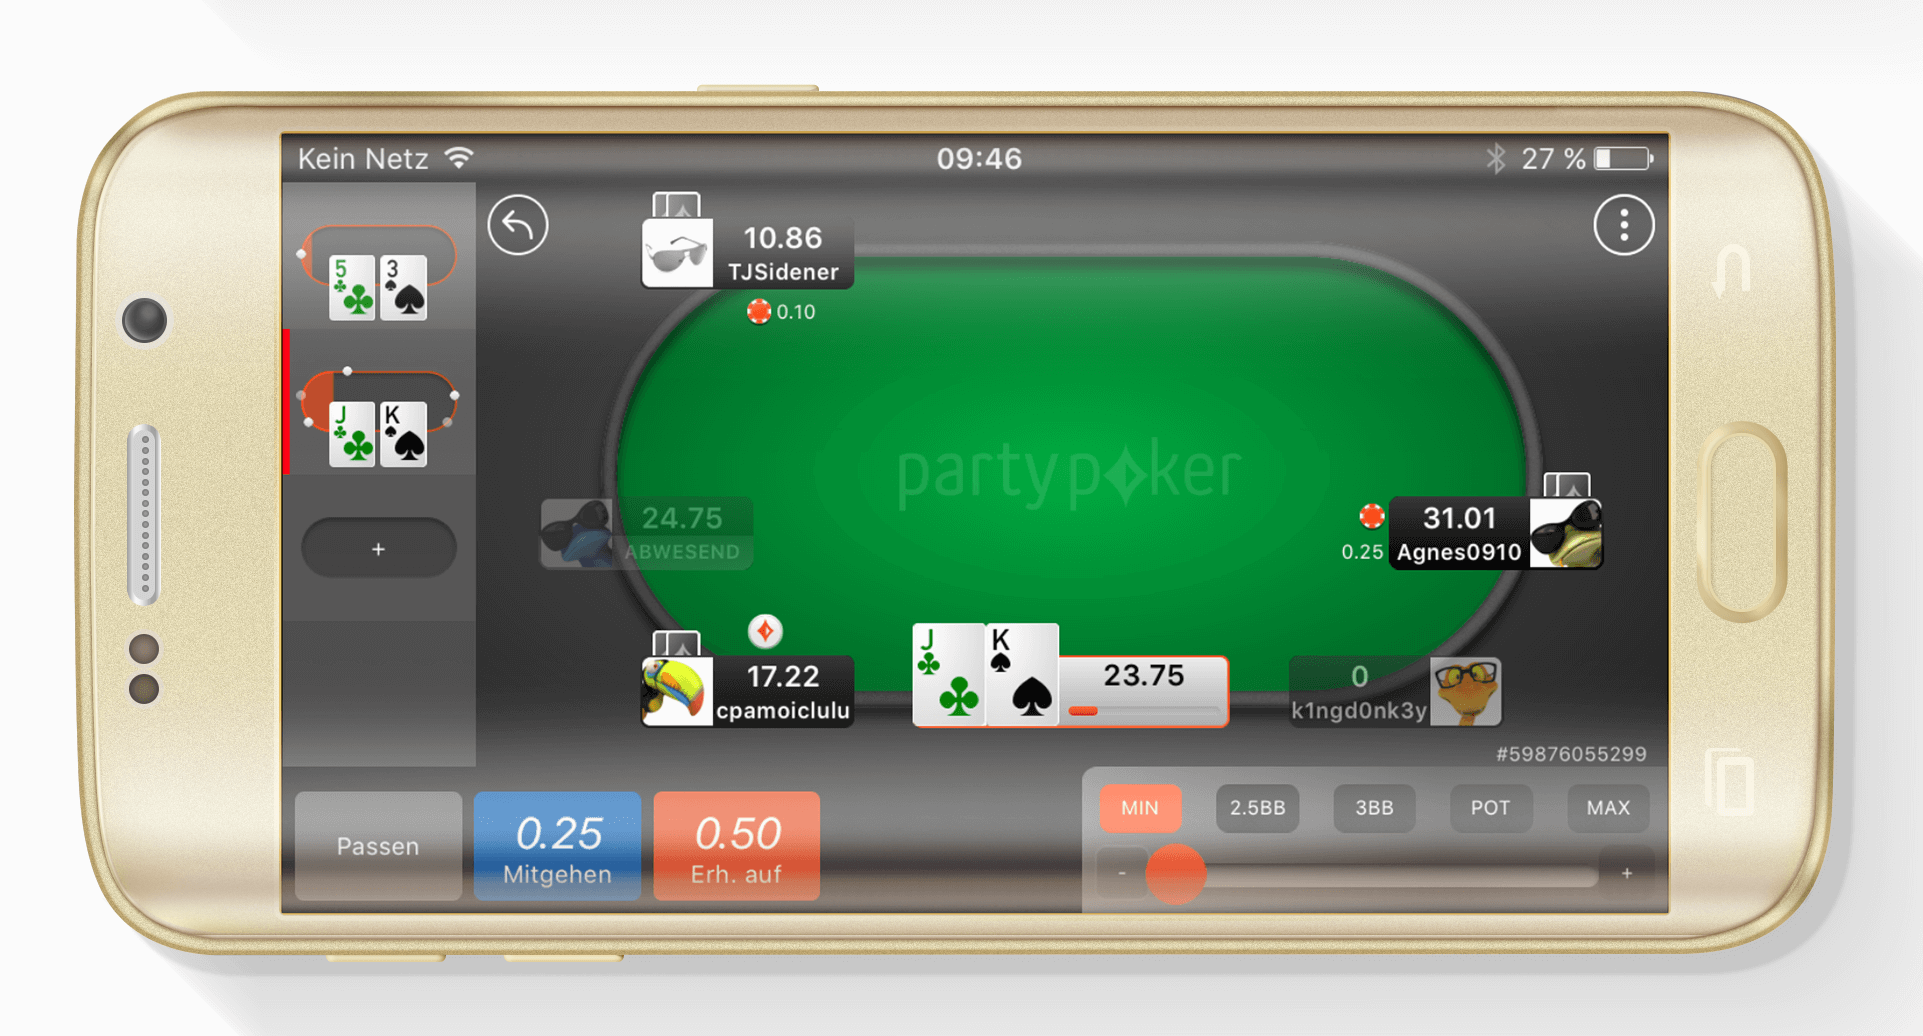 Android Poker For Real Money